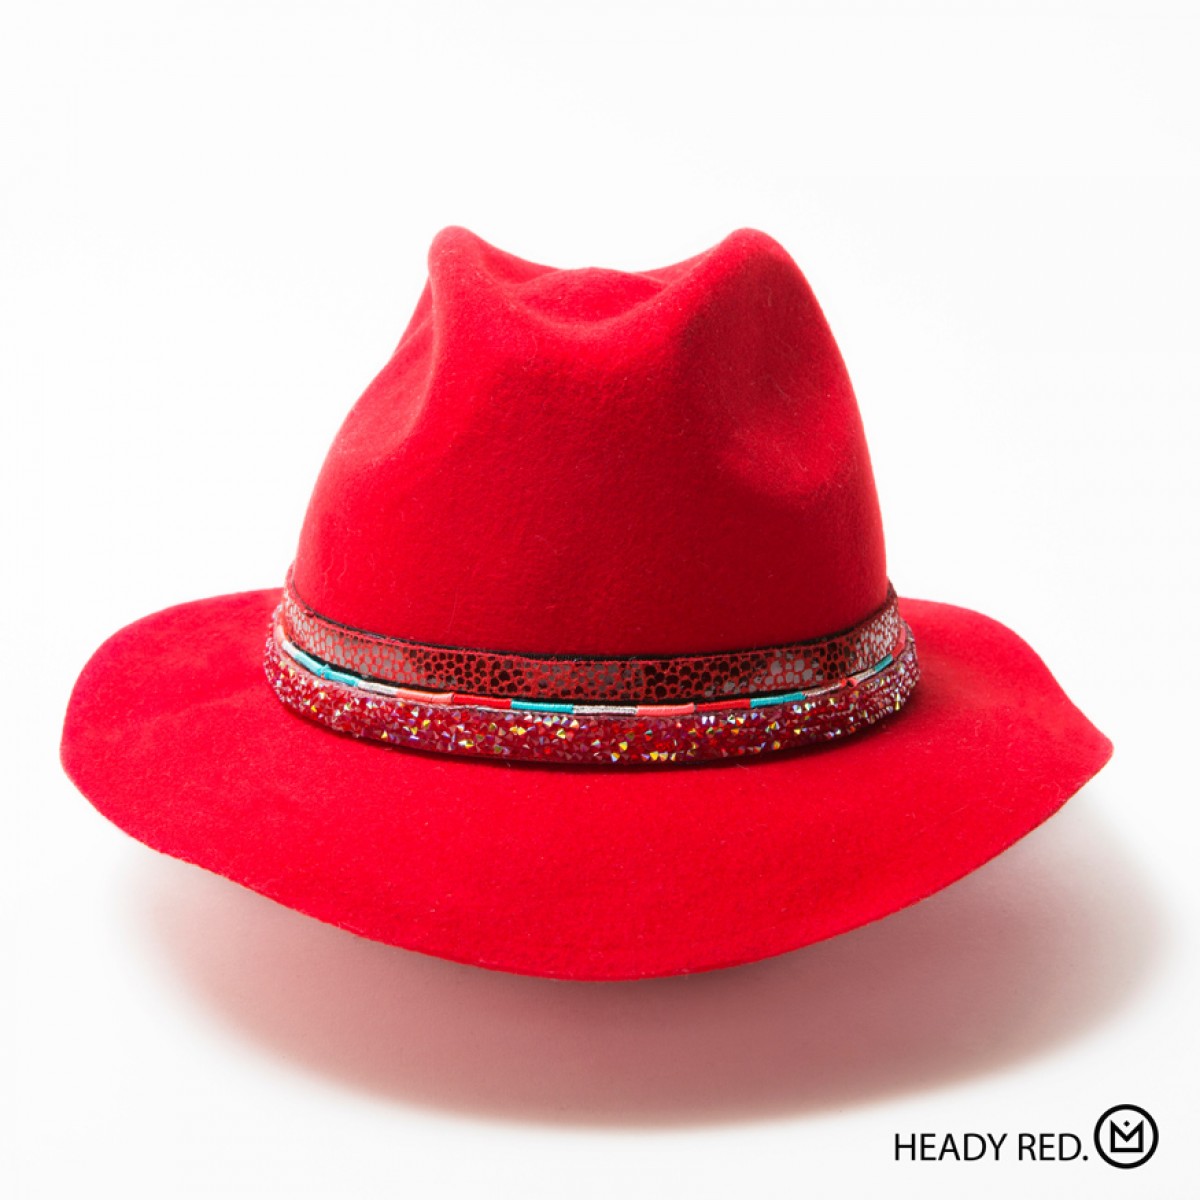 Amenapih Heady Hat In Red Pc Android iPhone And iPad Wallpaper